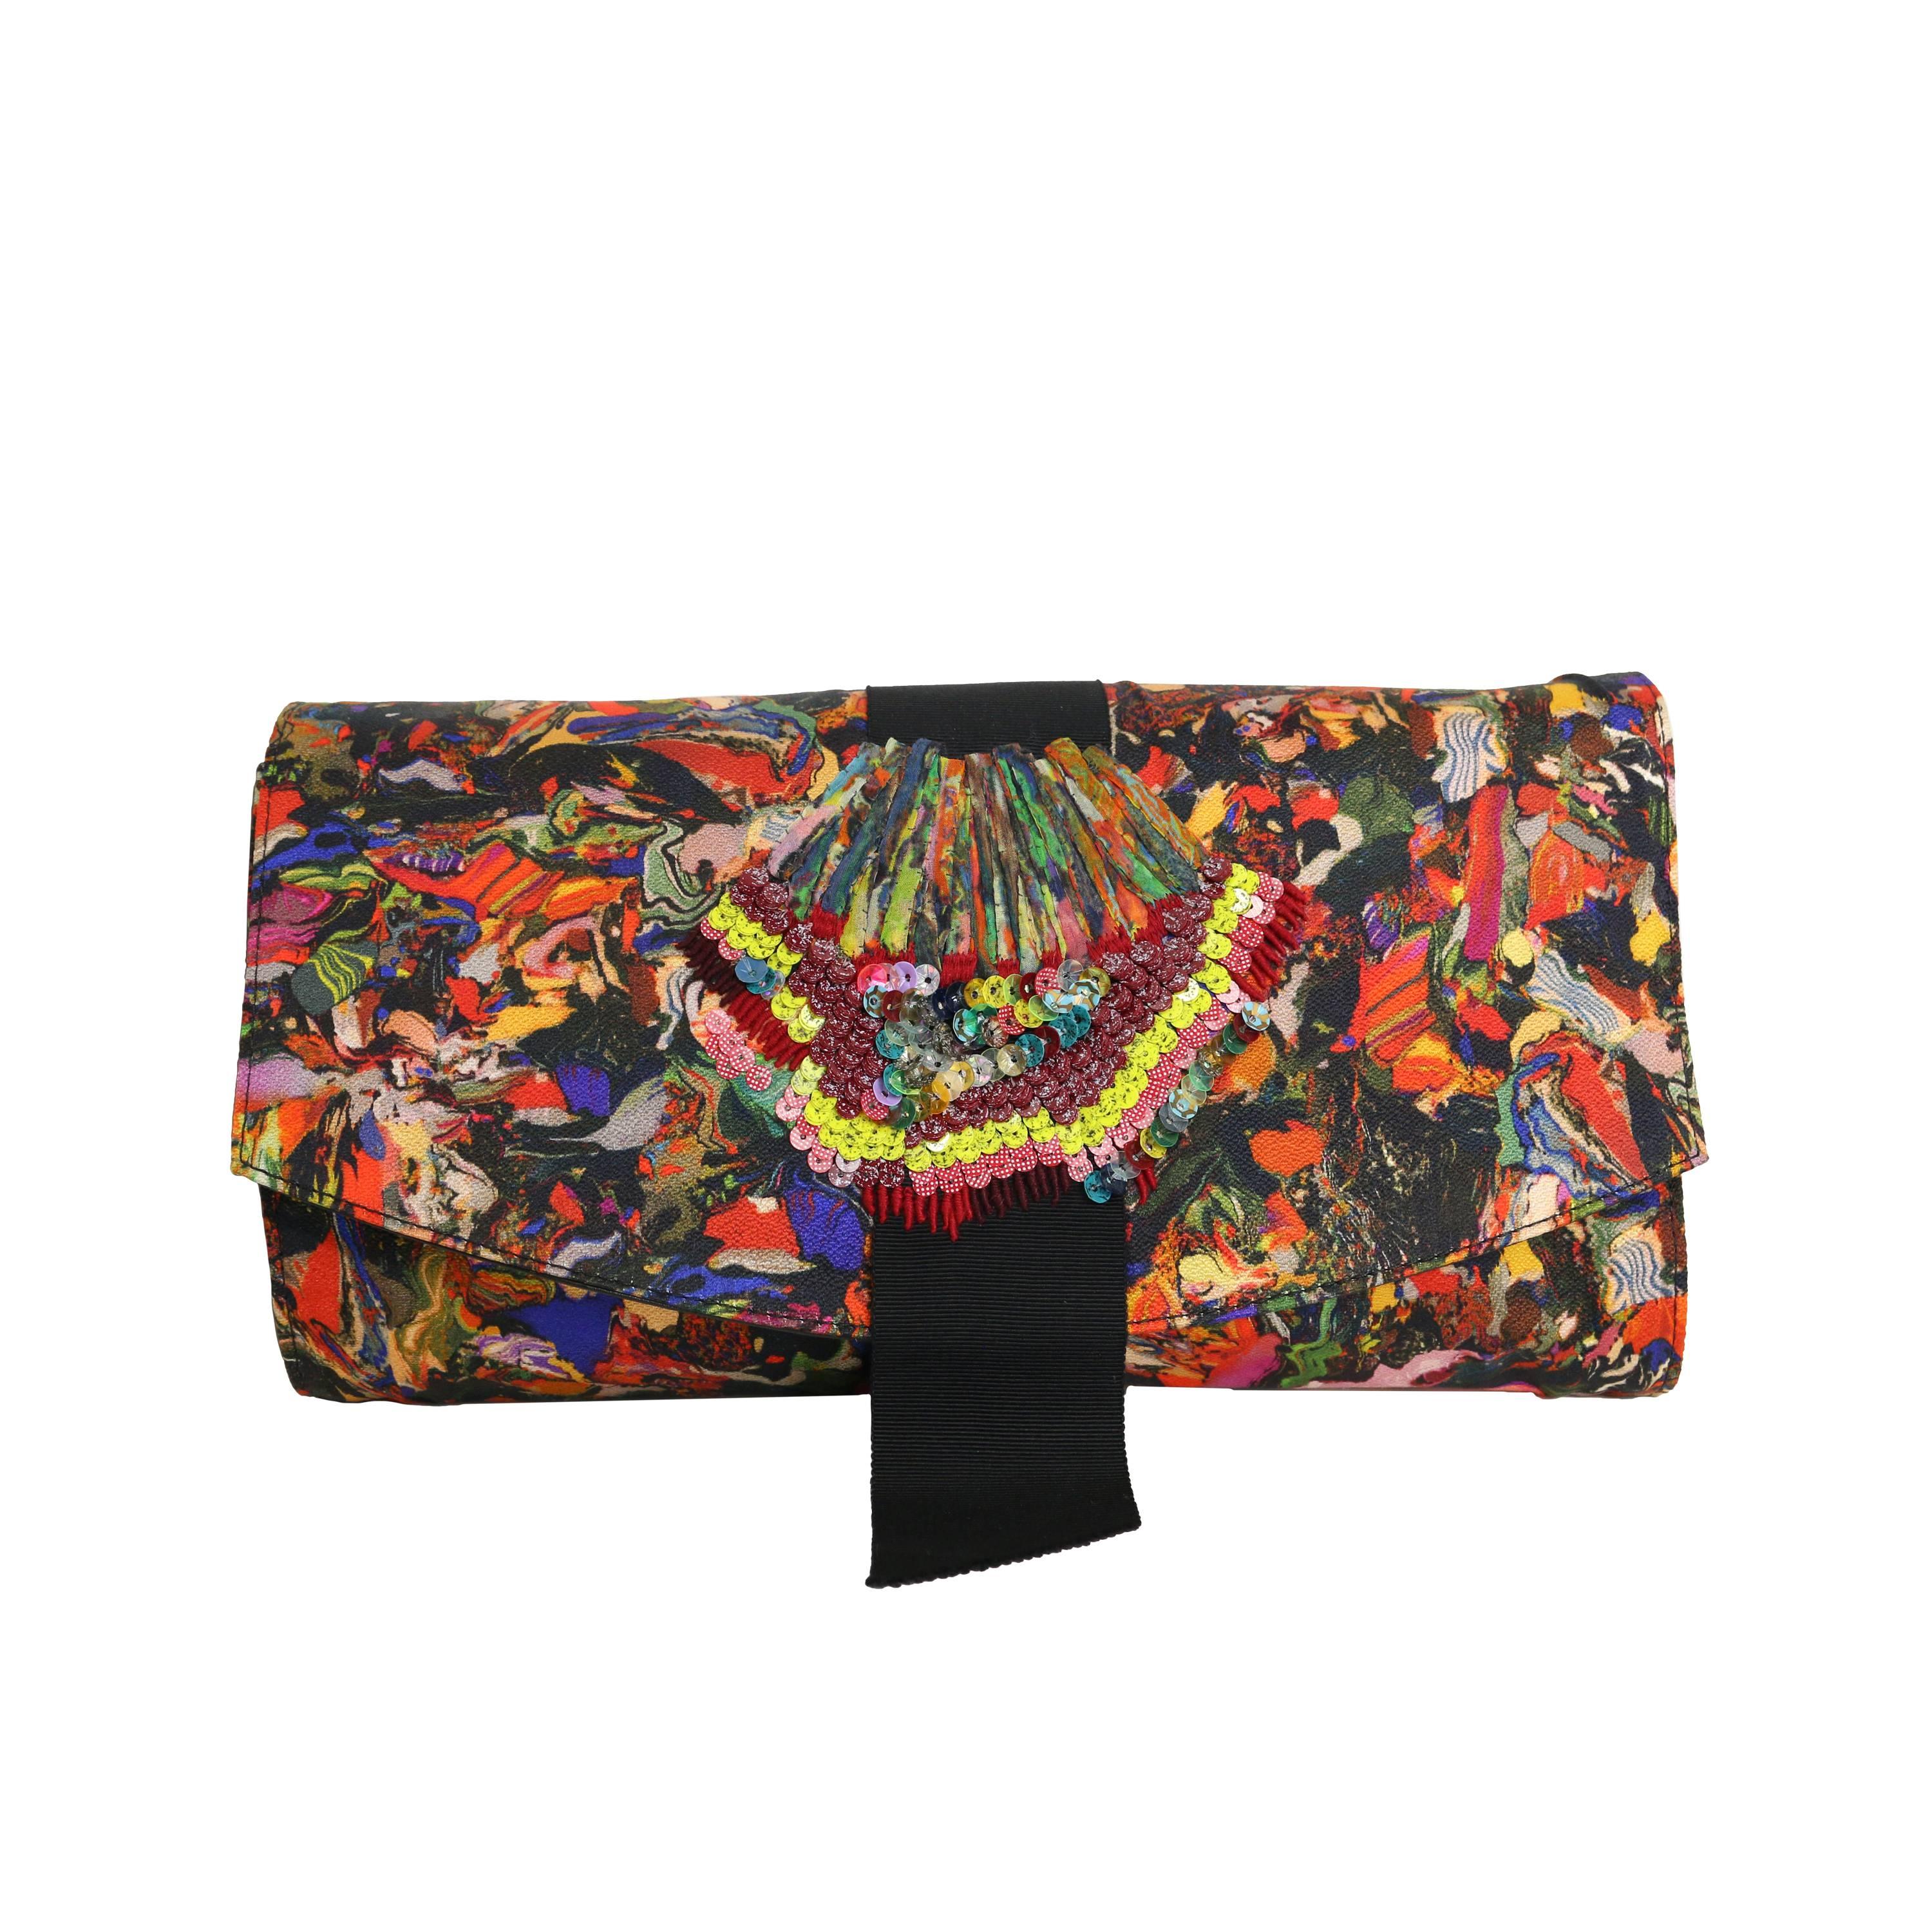 Dries Van Noten Multi-Colour Embroidered Sequins Clutches